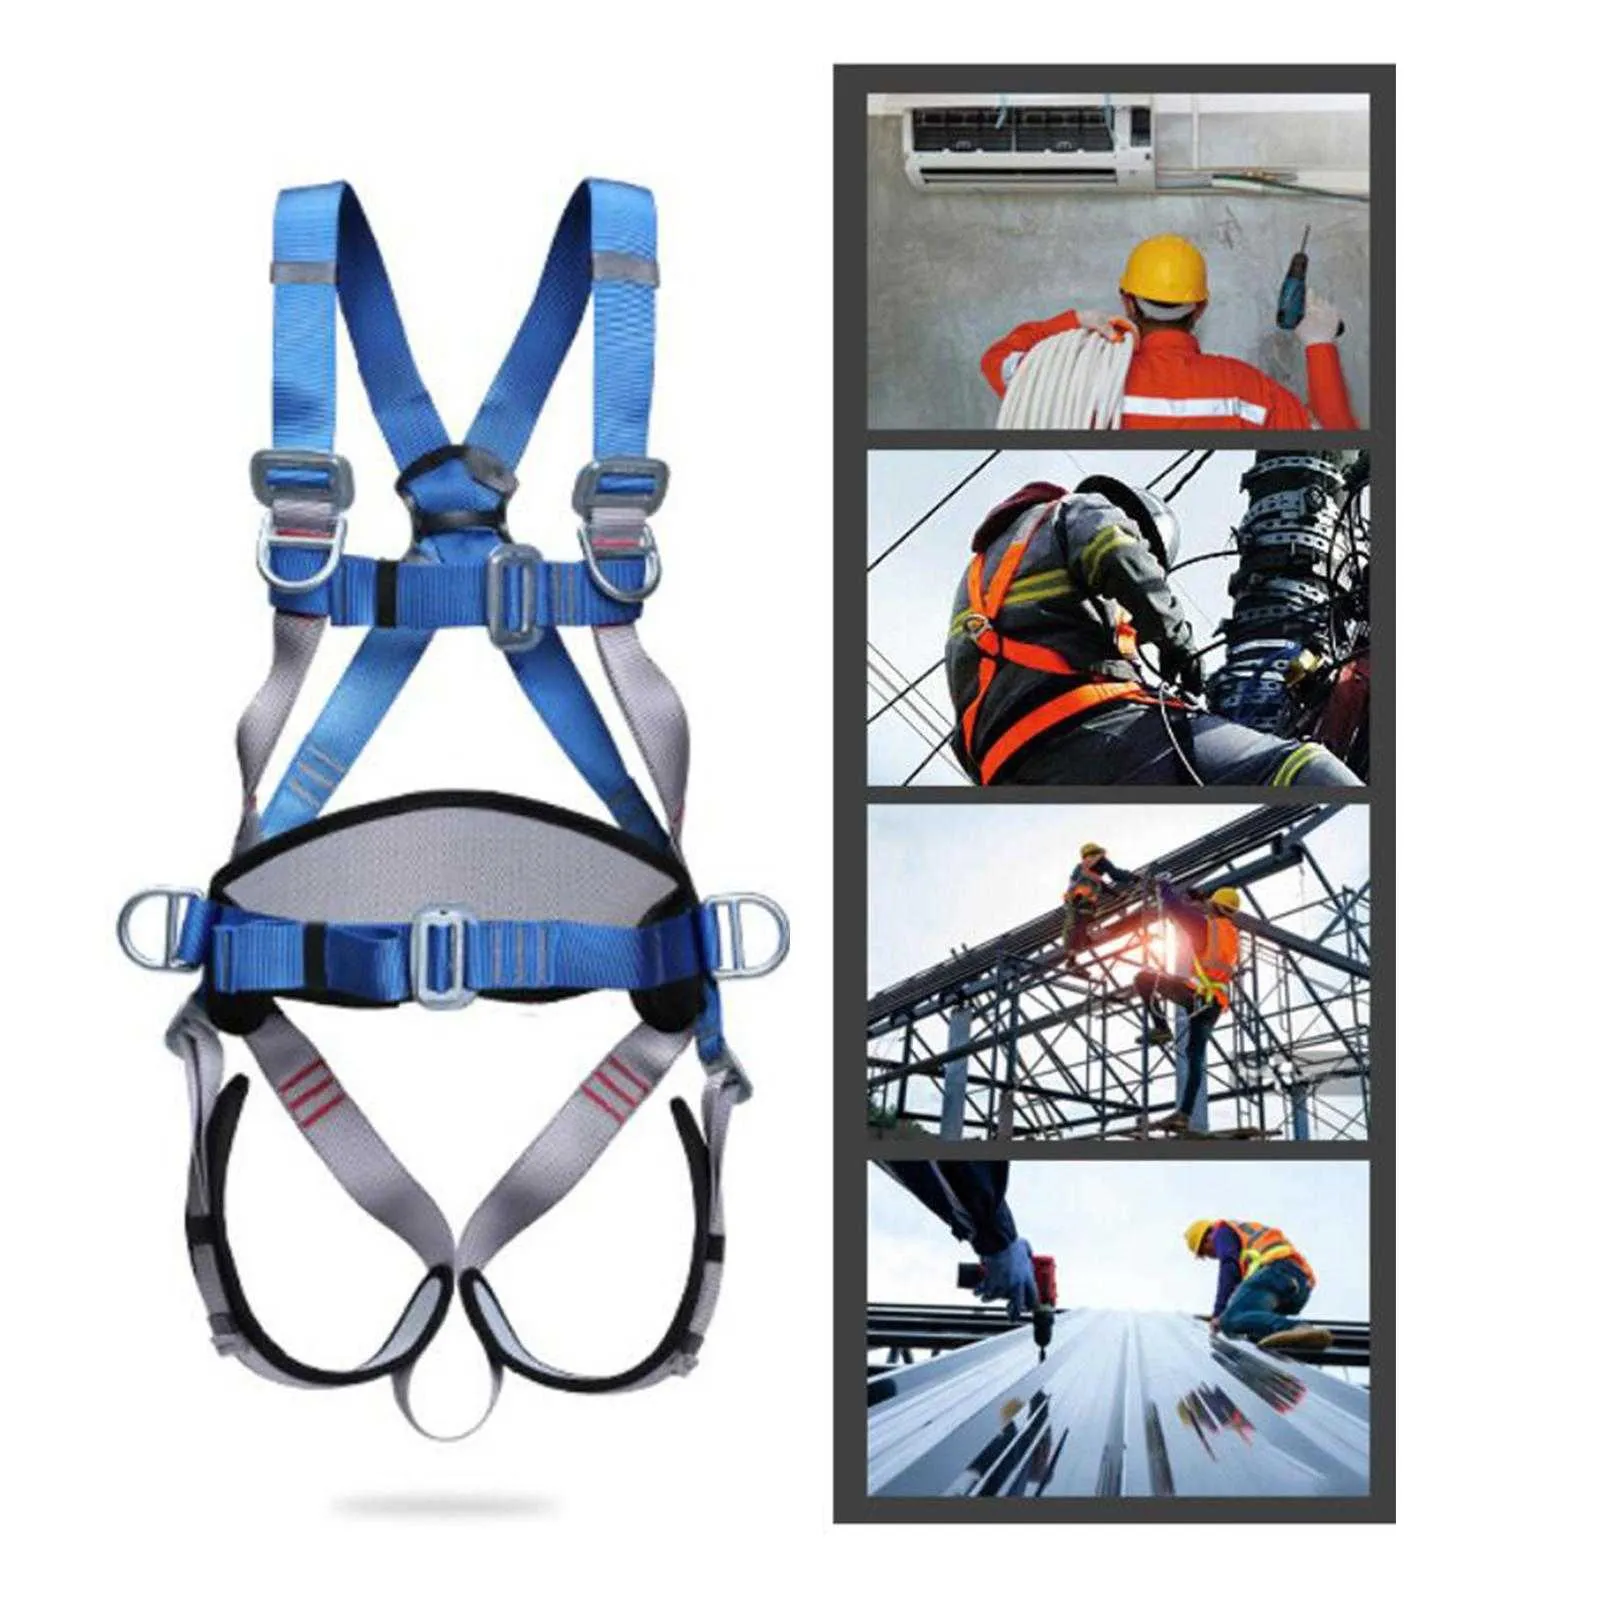 Full Body Climbing Harness Safety Harness Belt Fall Protection for Caving Tree Rappelling Fire Rescuing Outdoor Rock Climbing 